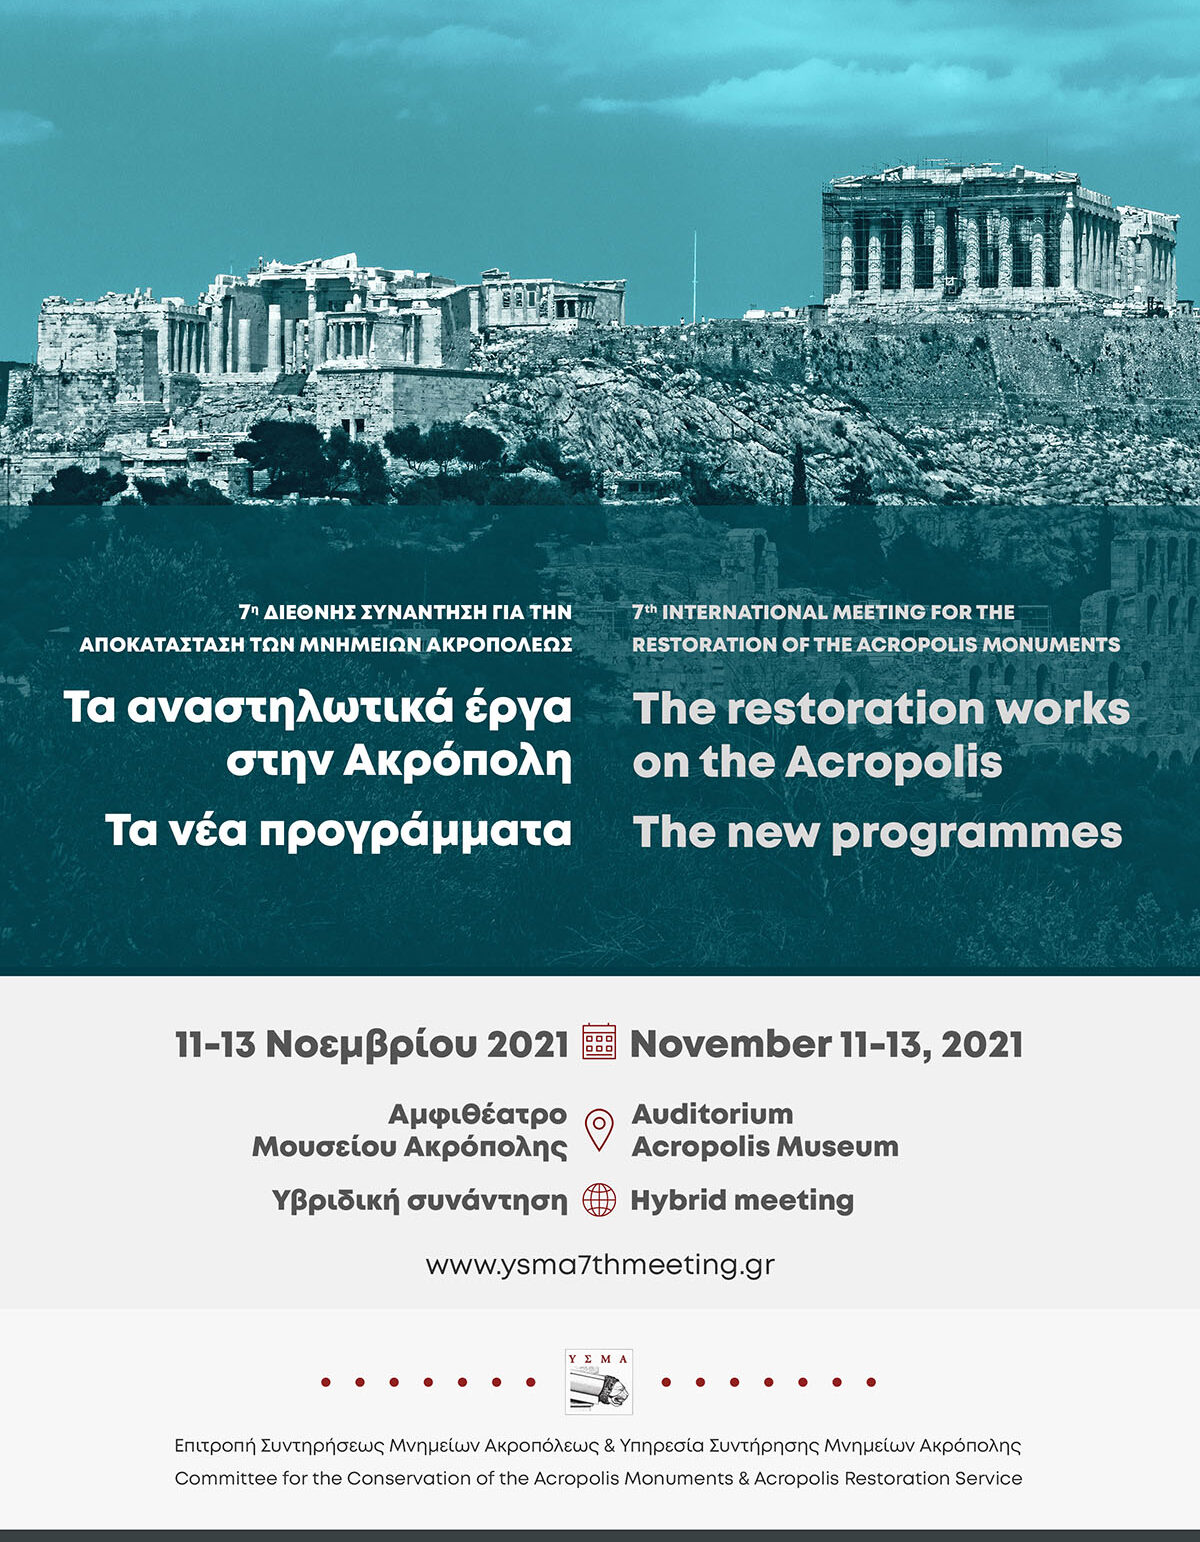 7th International Meeting for the Restoration of the Monuments of the Acropolis 2021